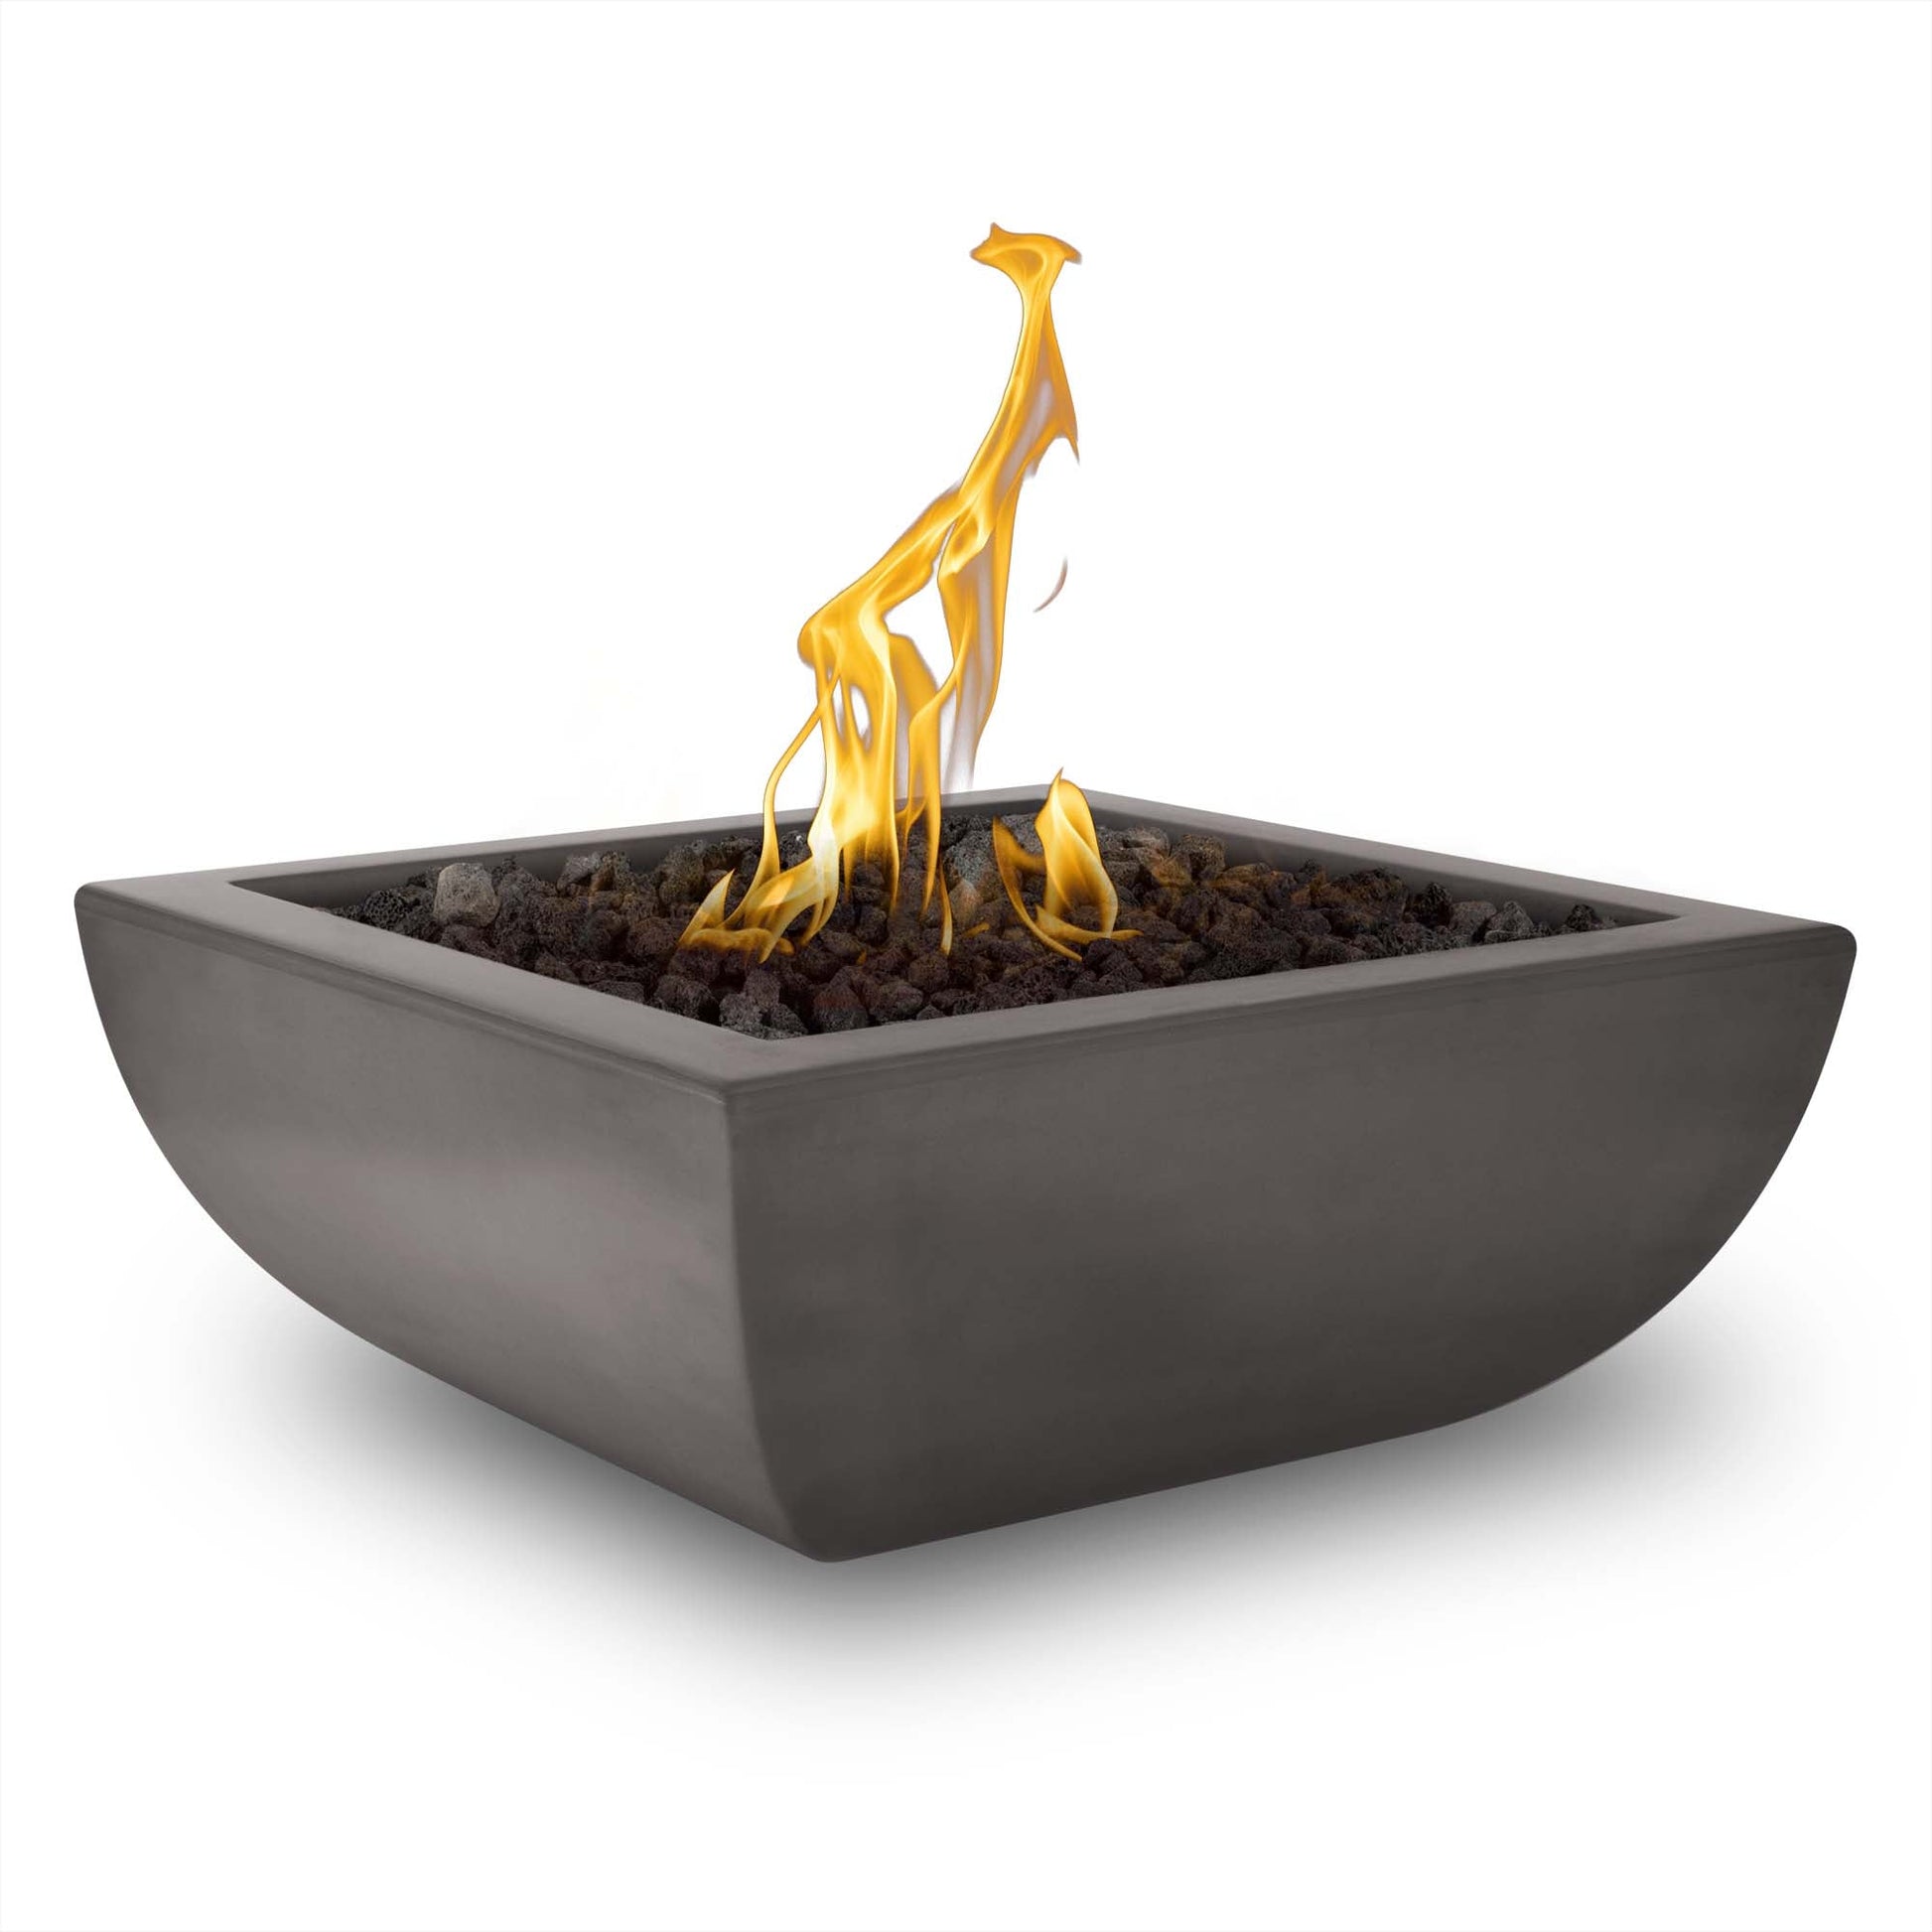 The Outdoor Plus Square Avalon 30" Gray GFRC Concrete Liquid Propane Fire Bowl with Match Lit with Flame Sense Ignition